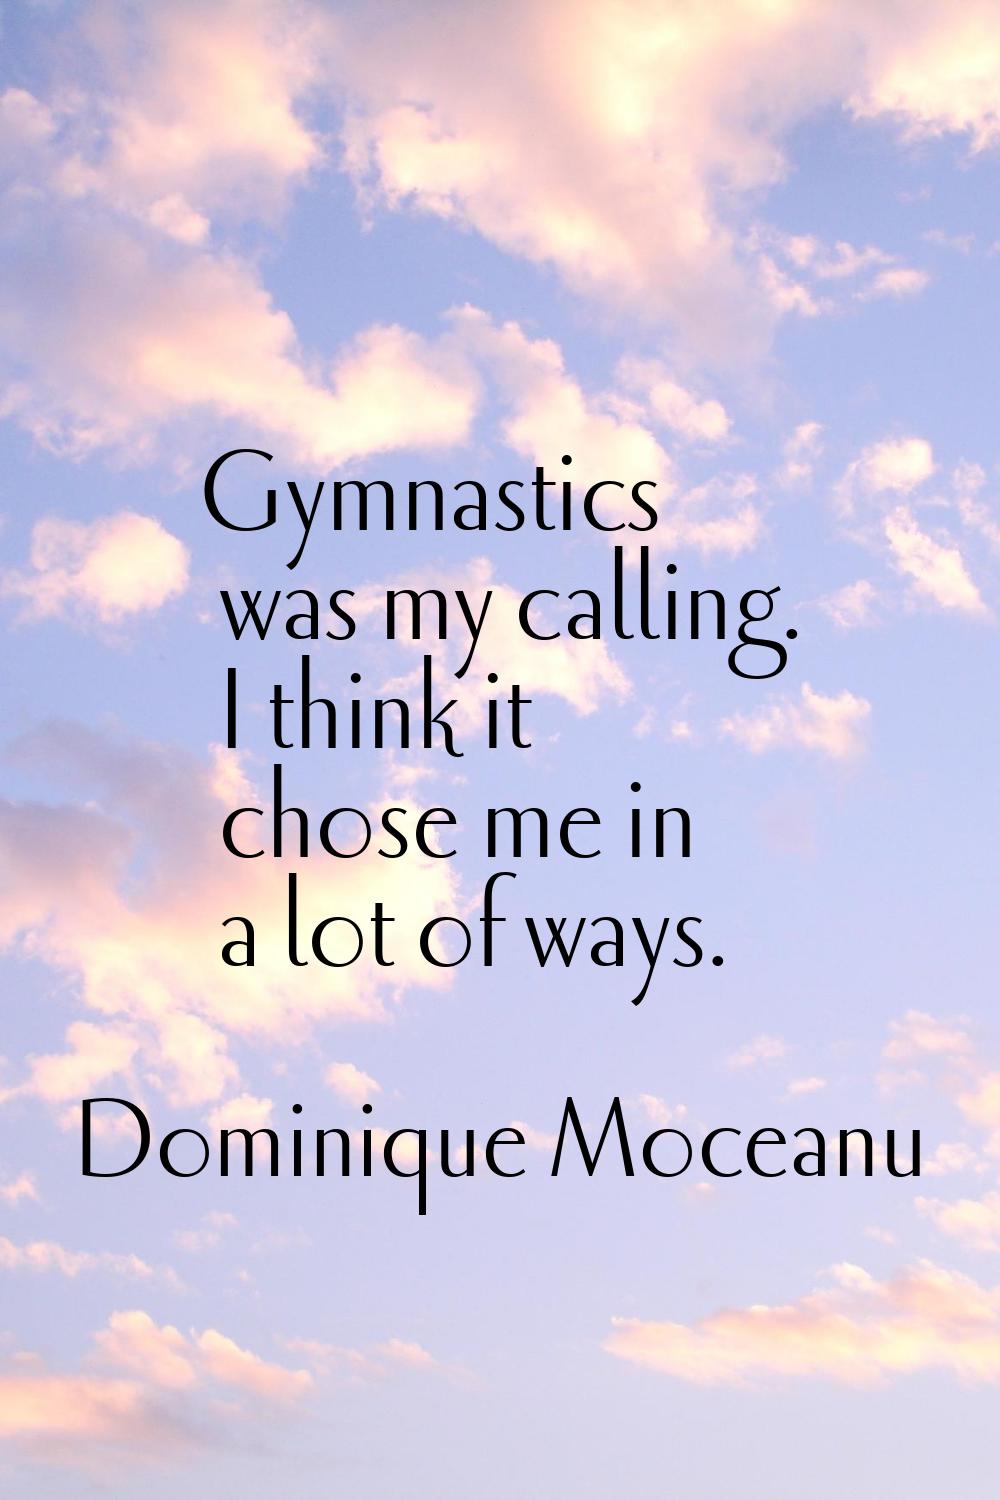 Gymnastics was my calling. I think it chose me in a lot of ways.